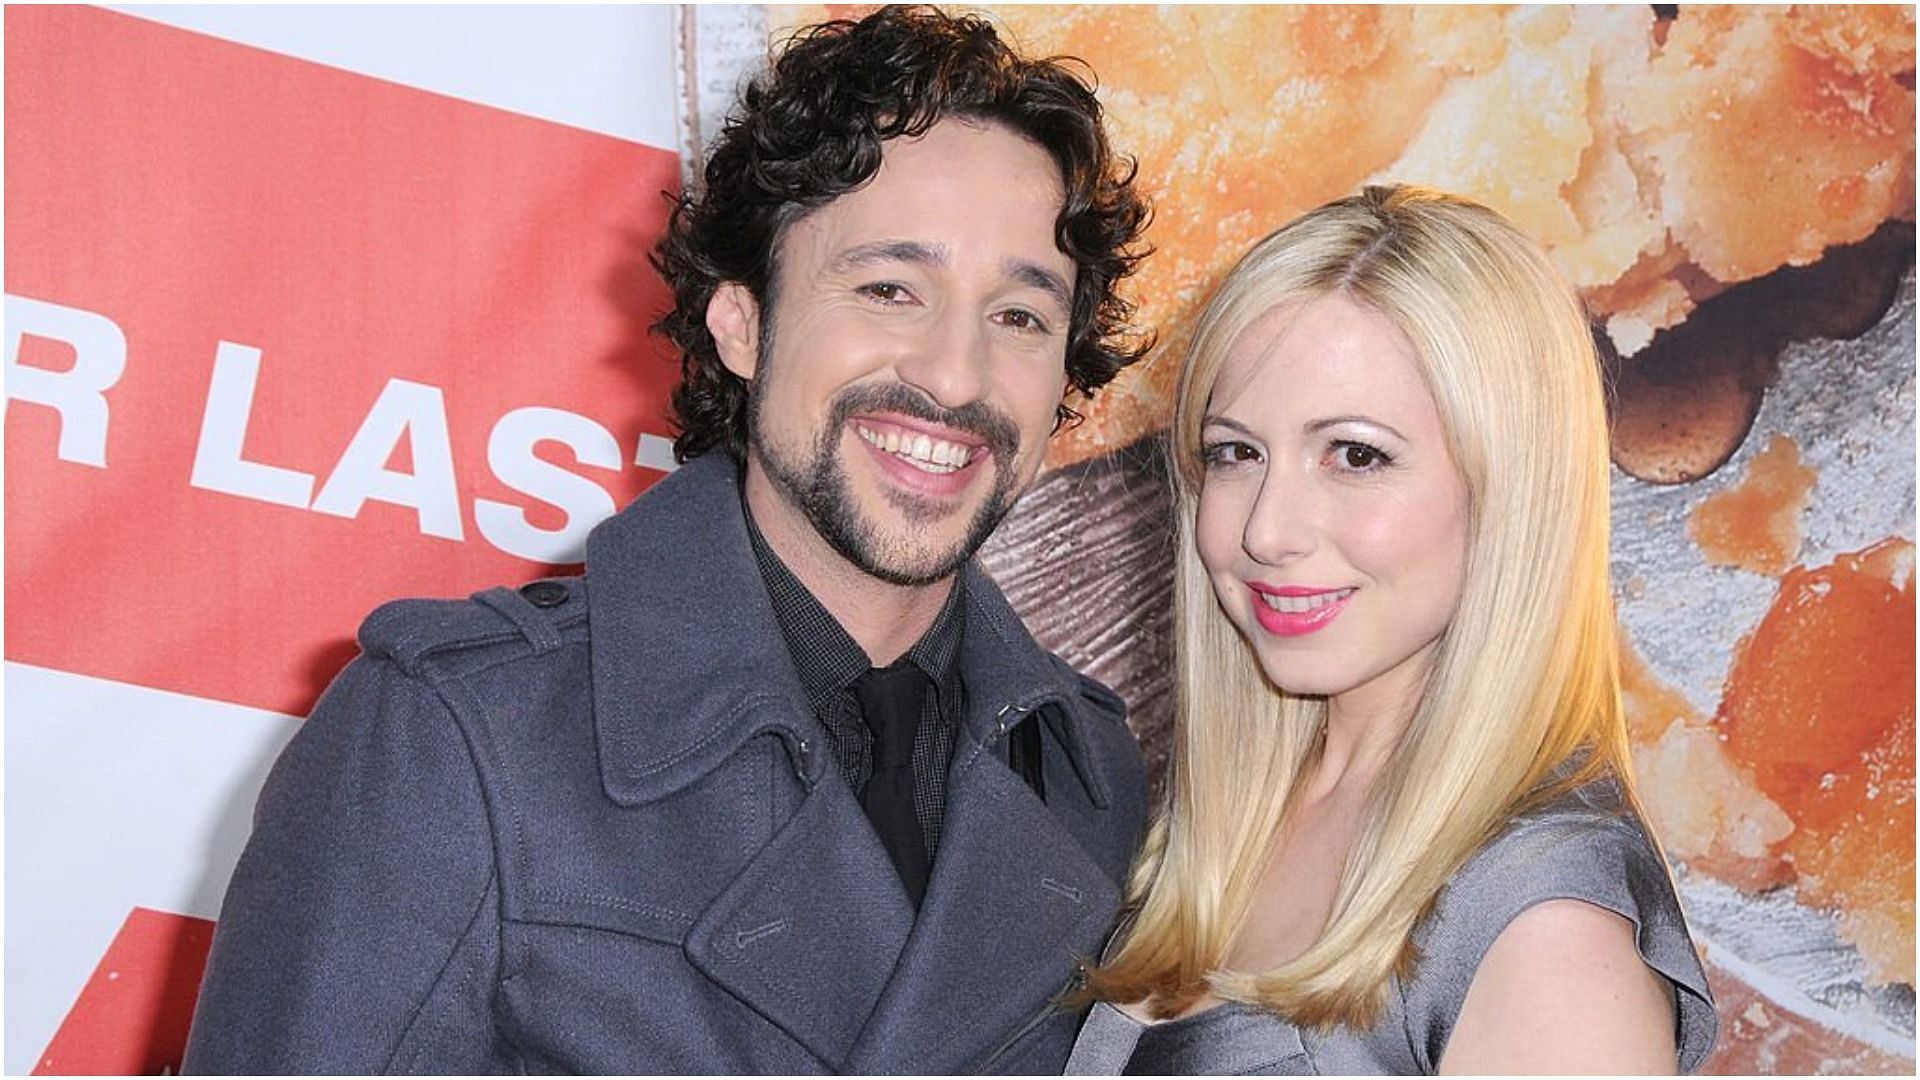 Thomas Ian Nicholas and Colette Marino are getting divorced (Image via Barry King/Getty Images)